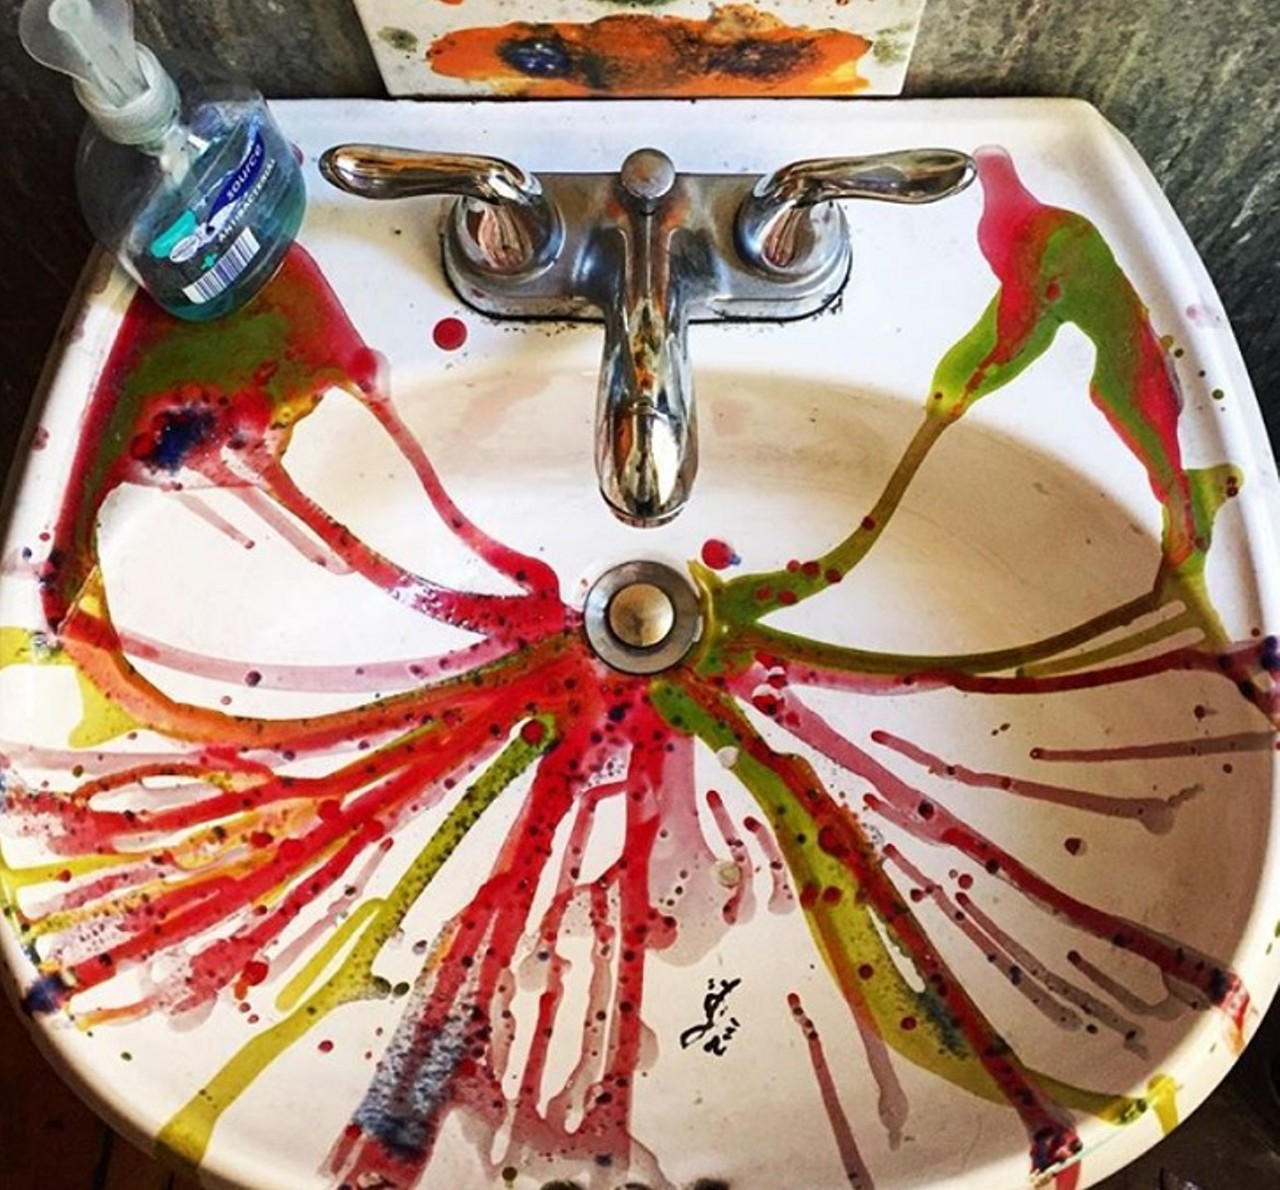 Algebra Tea House
2136 Murray Hill Rd., 216-421-9007
Algebra Tea House&#146;s quirky interior looks like an artsy person&#146;s fever, almost too good to be true. And the cozy bathroom is the same, paint splatters and all.
Photo via elizapoor114/Instagram